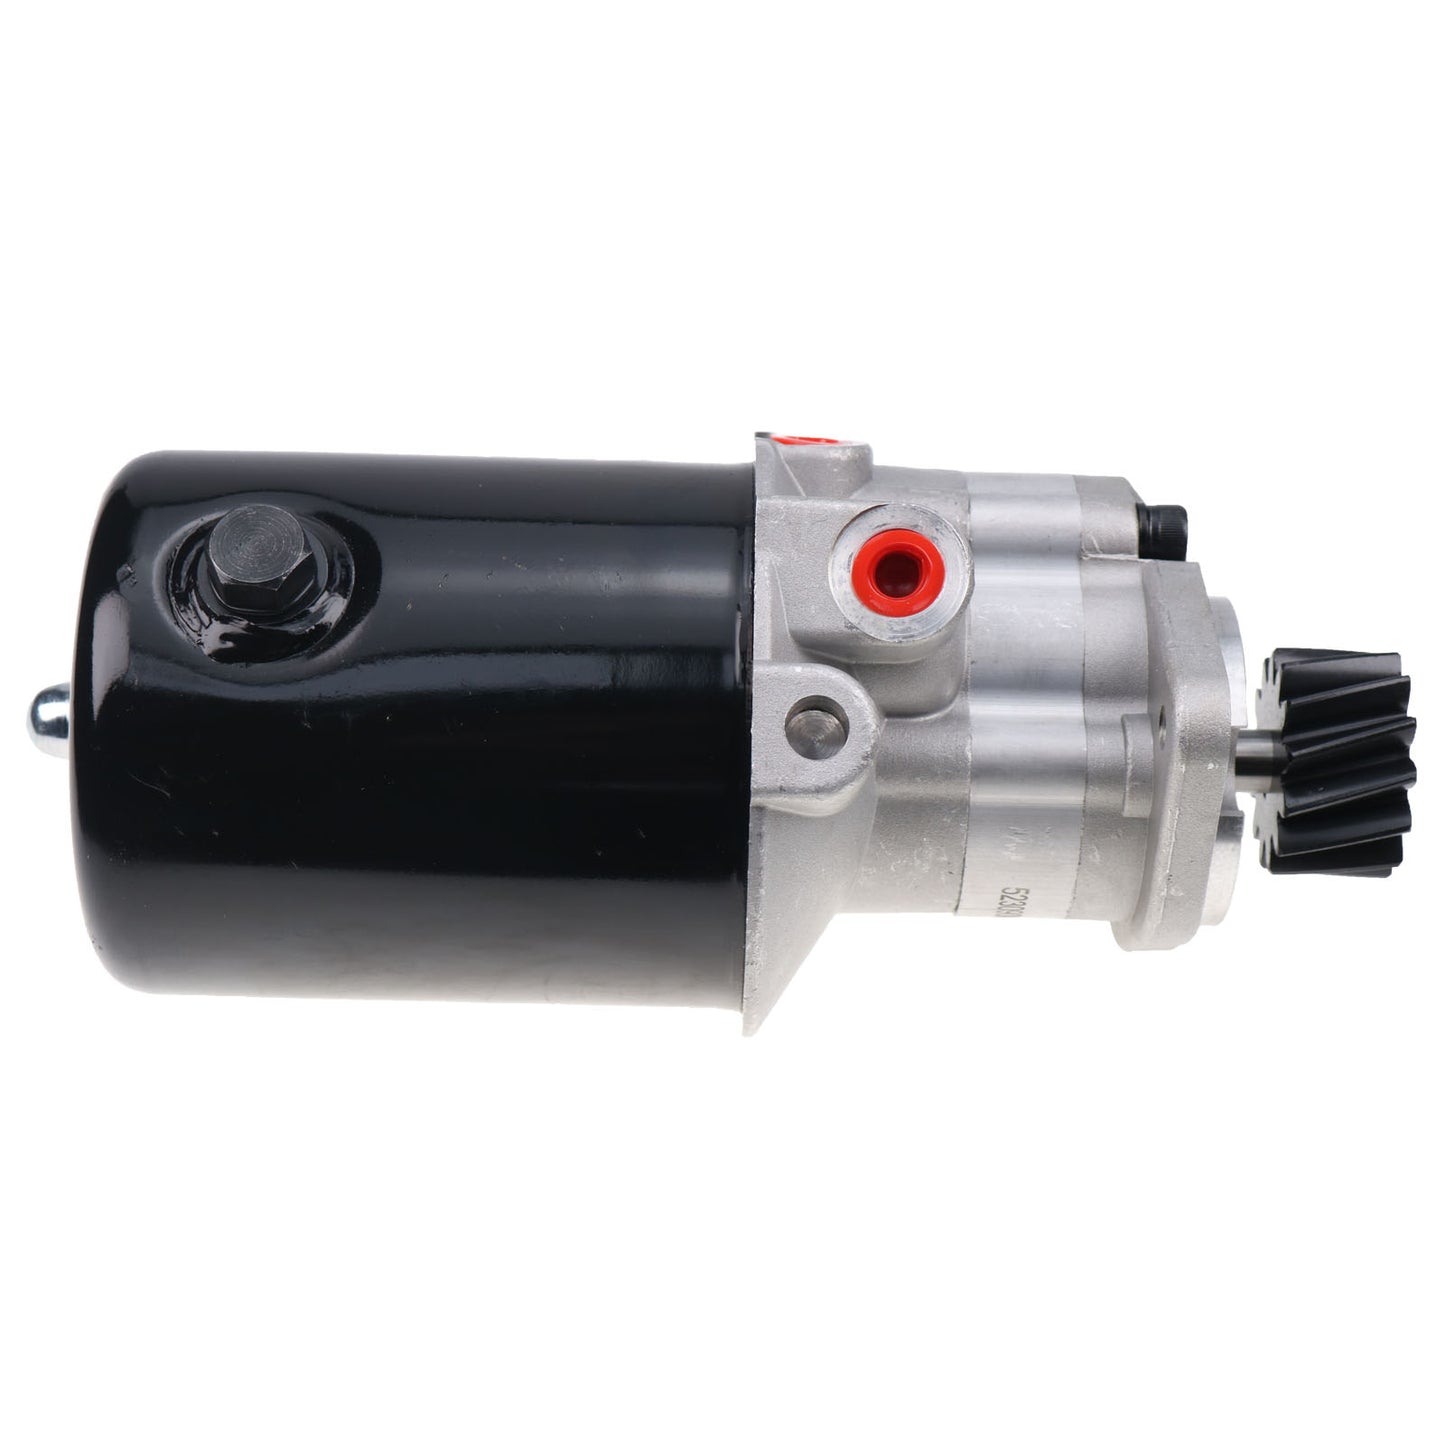 New 523090M91 Power Steering Pump Compatible with Massey Ferguson 165 255 265 302 304 30 40 50 65 3165+